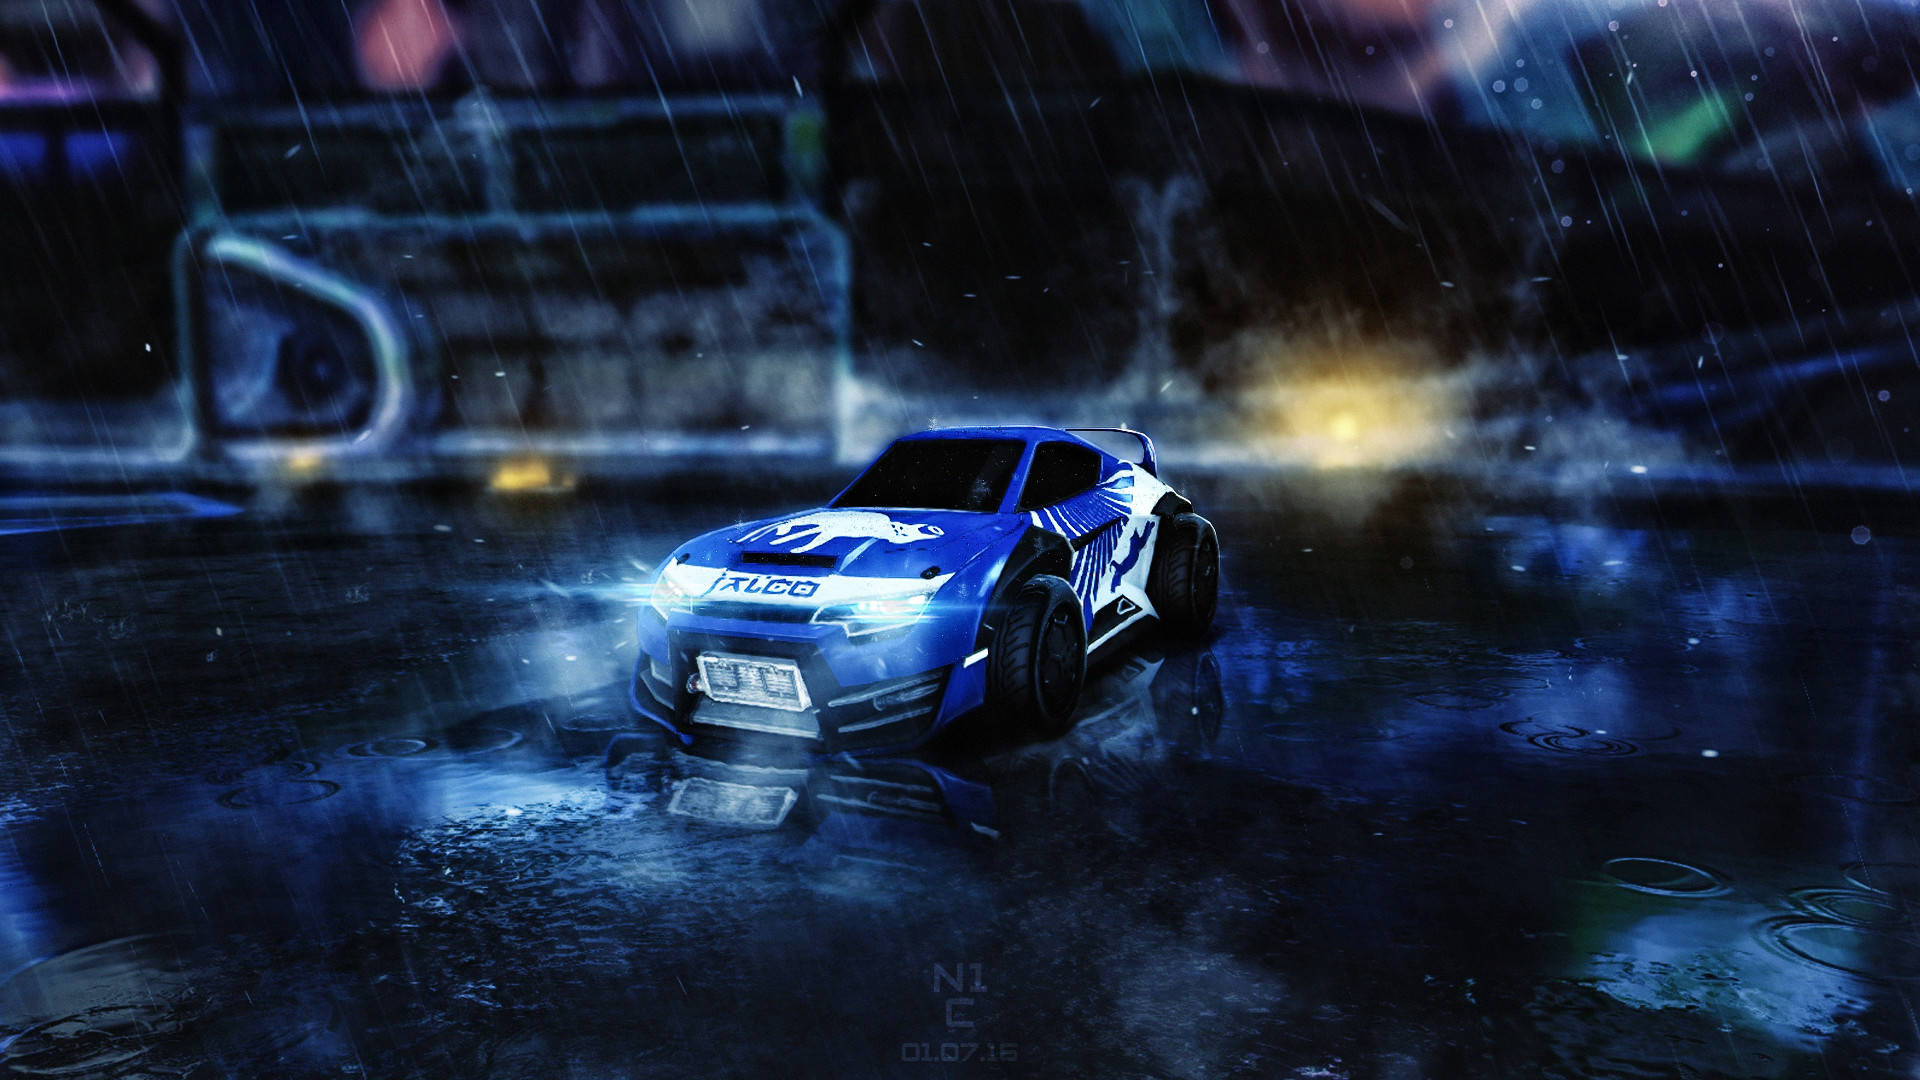 Cool Rocket League Car In The Rain Background